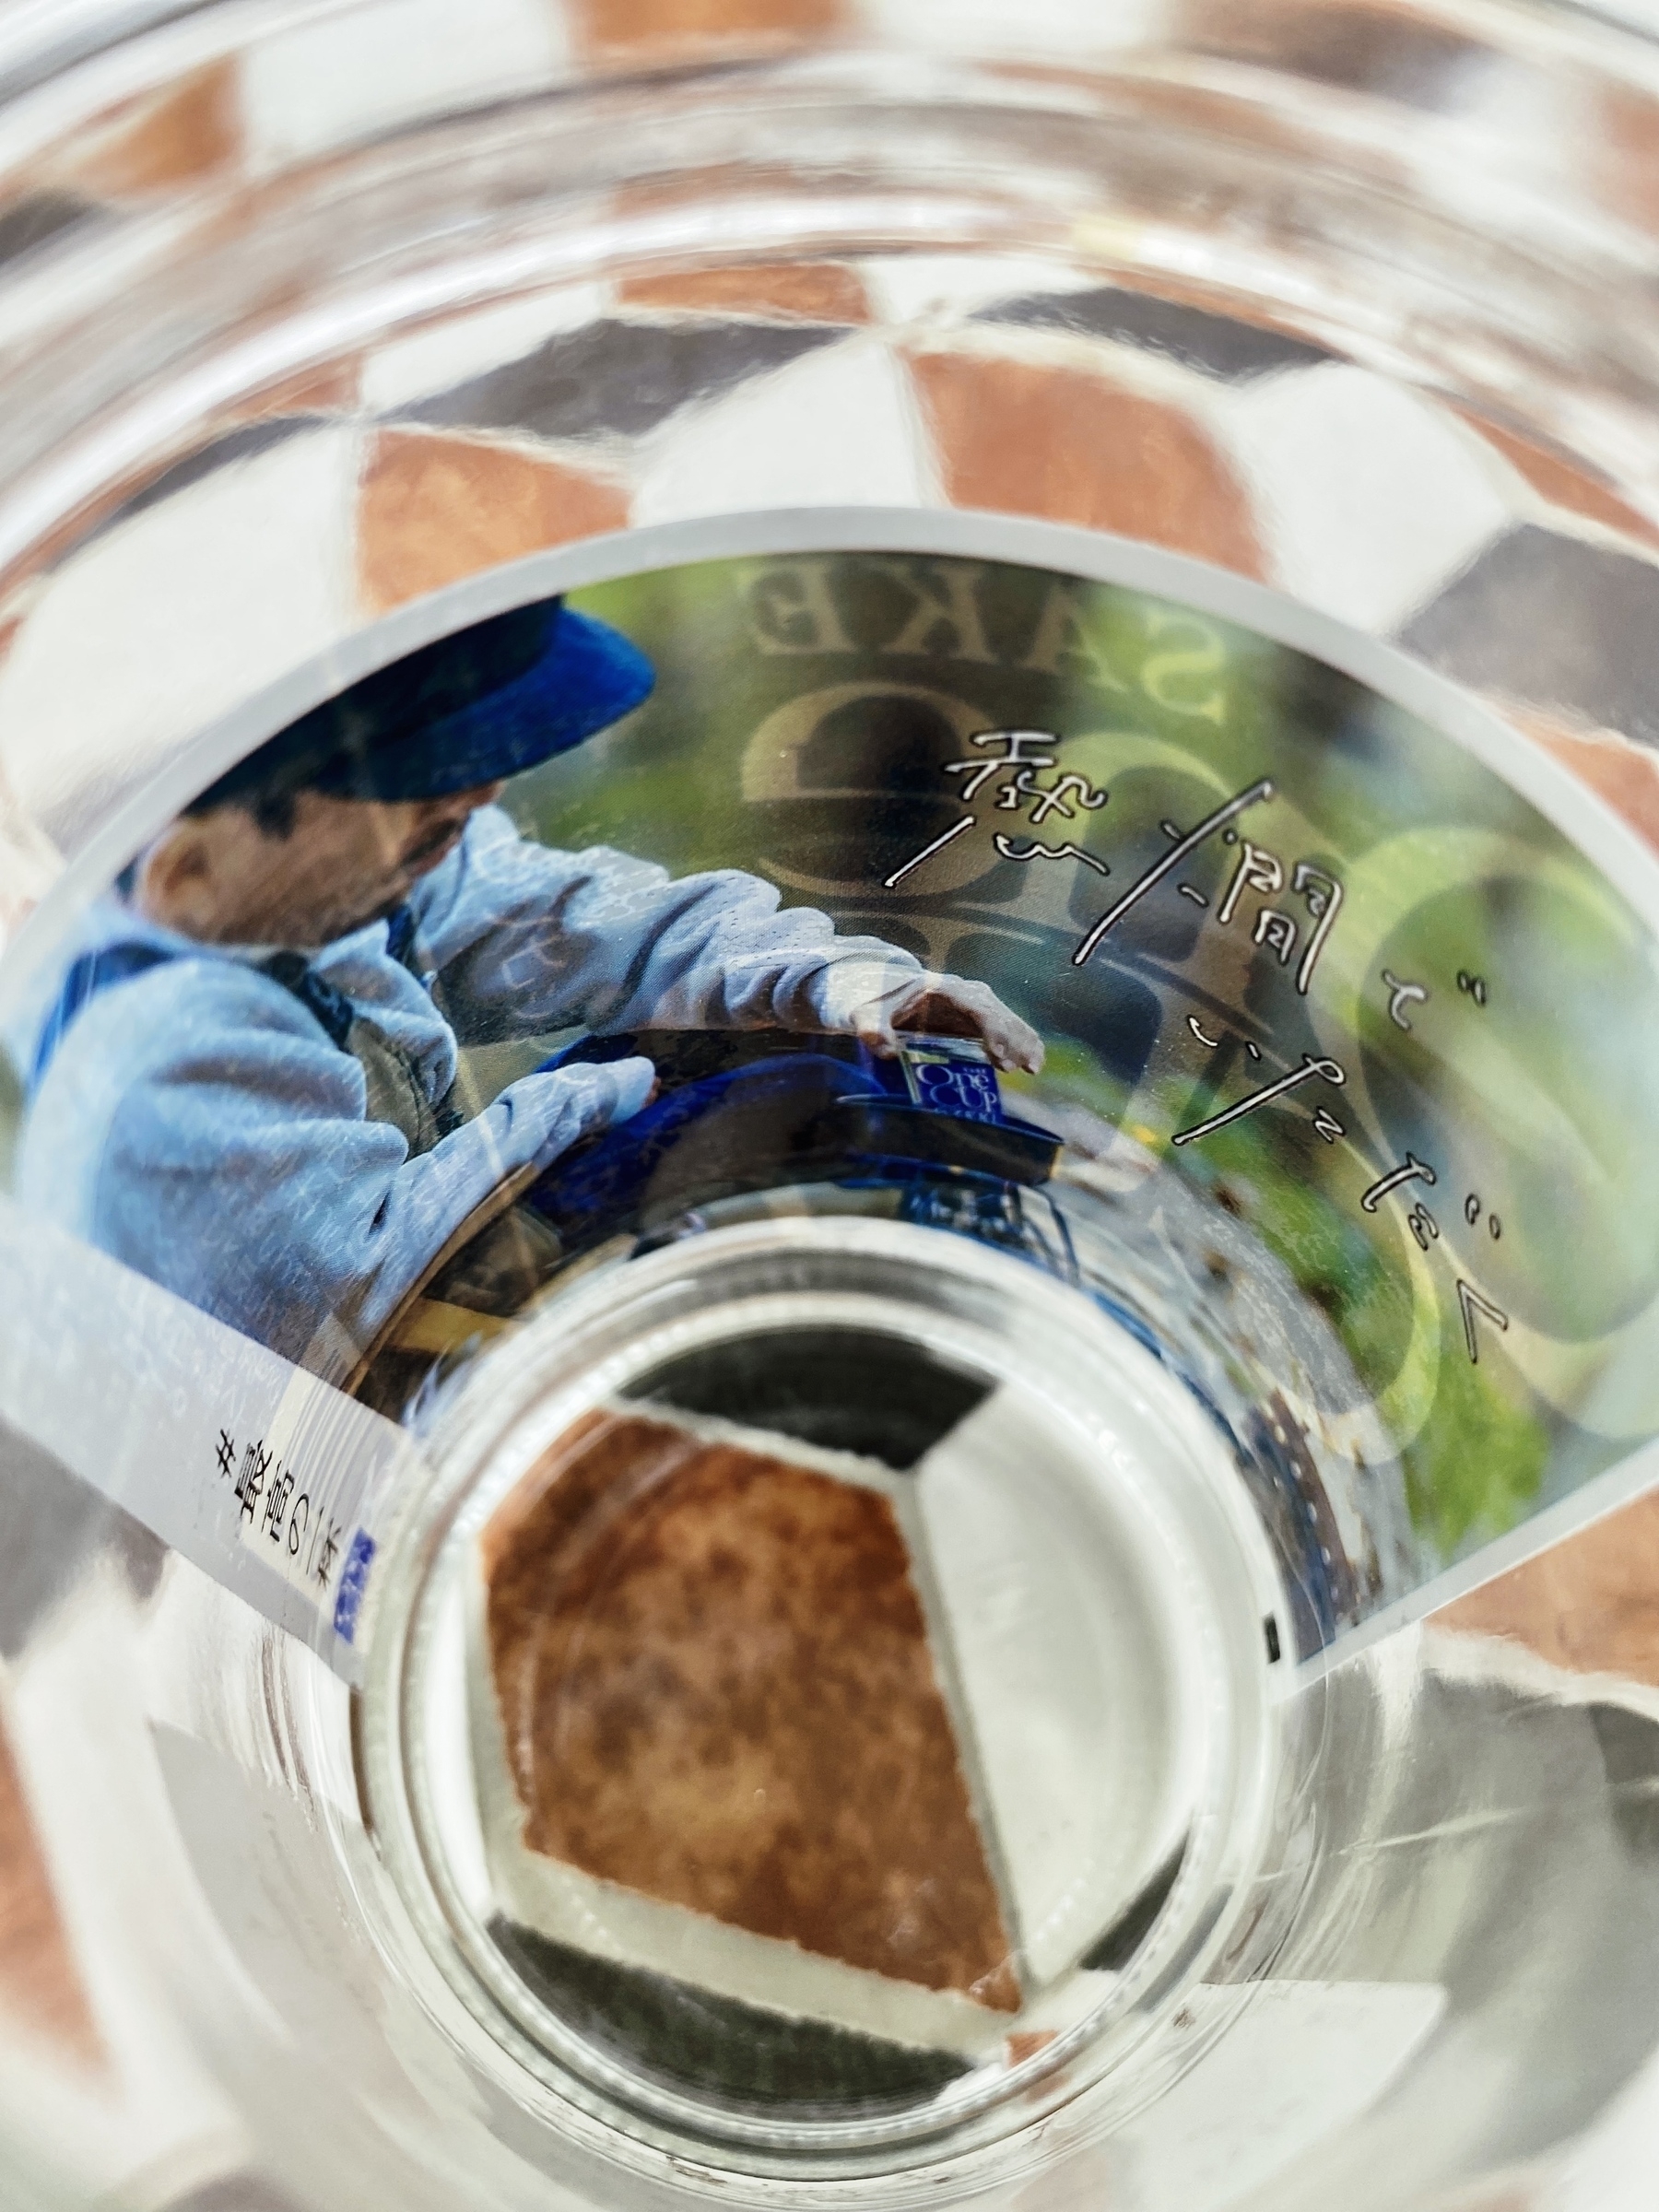 Looking down into a glass of sake with a photo sticker of a man warming sake on camping stove visible inside the glass